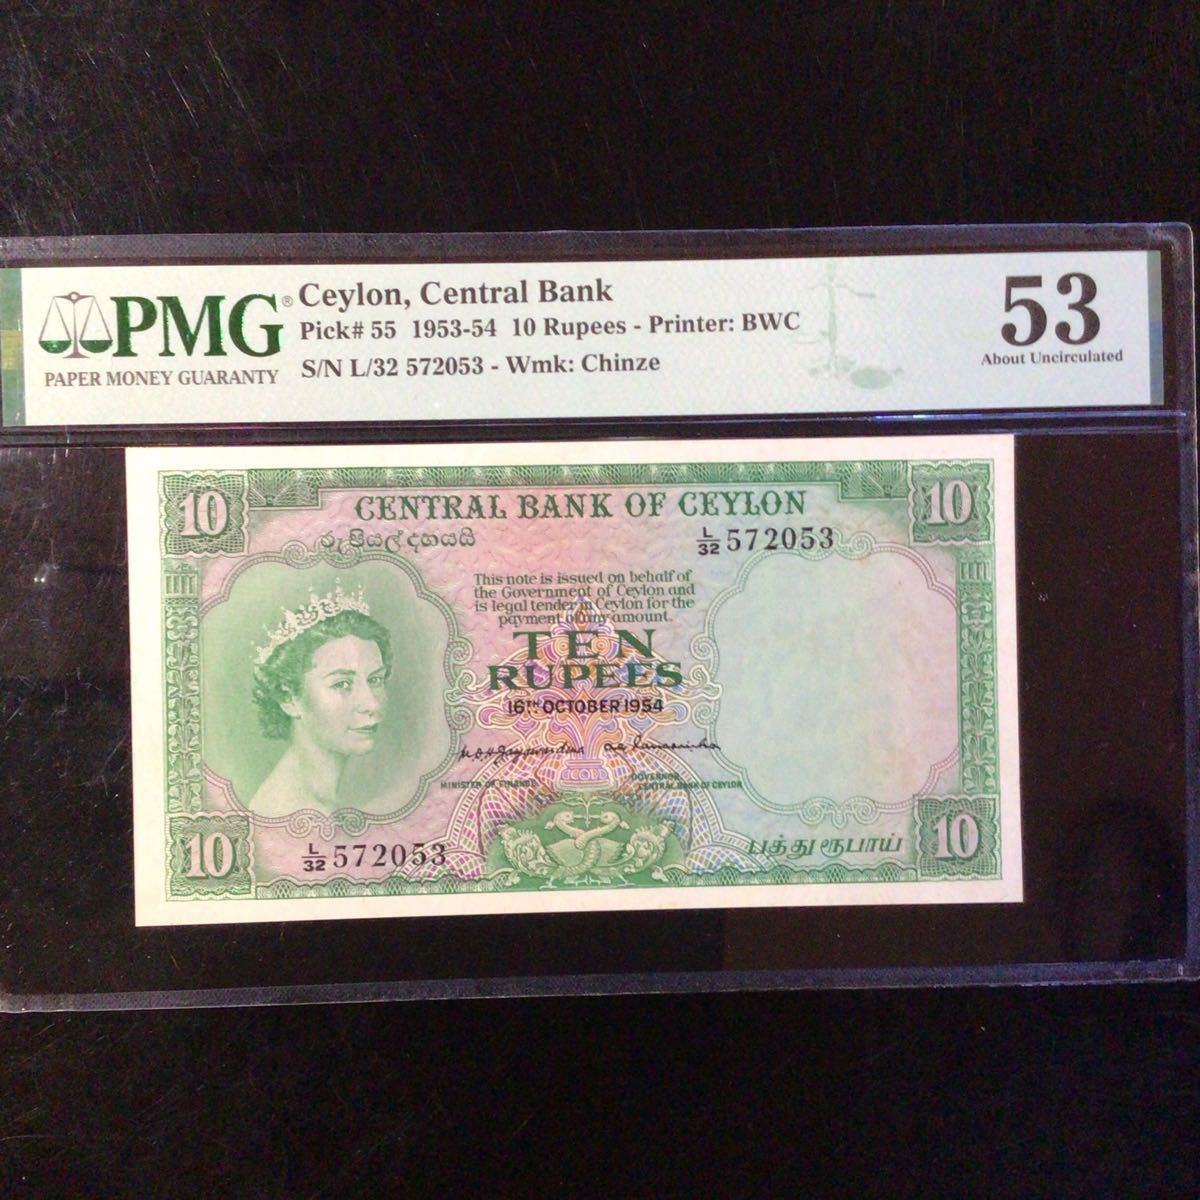 World Banknote Grading CEYLON《Central Bank》10 Rupees【1954】『PMG Grading About Uncirculated 53』